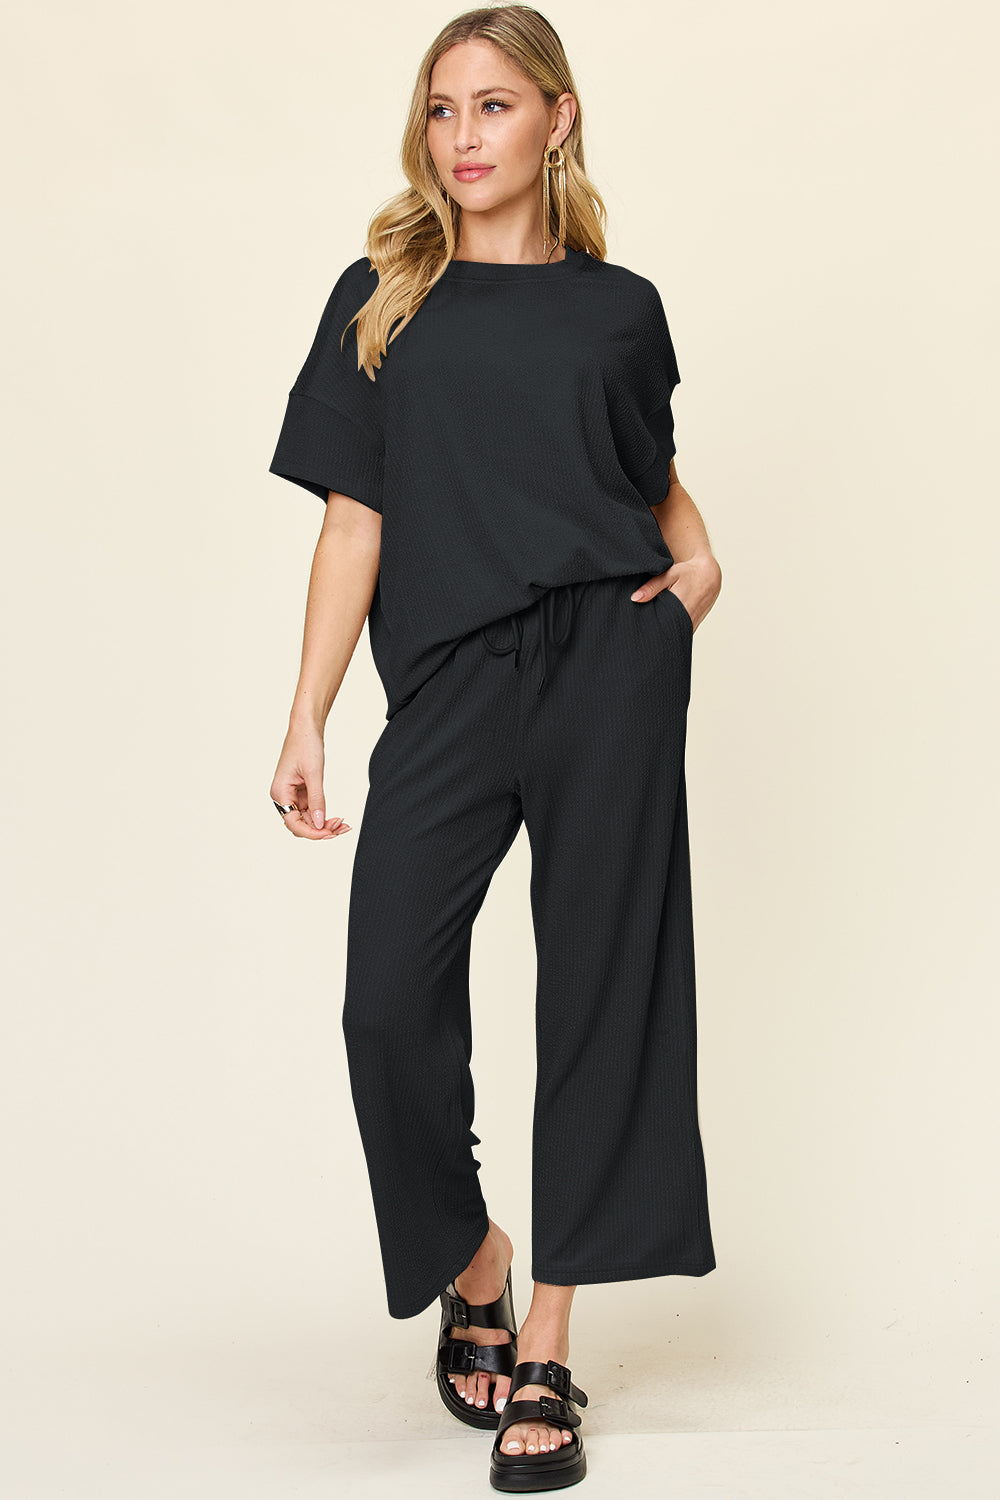 Textured Knit Top and Wide Leg Pant Set Black